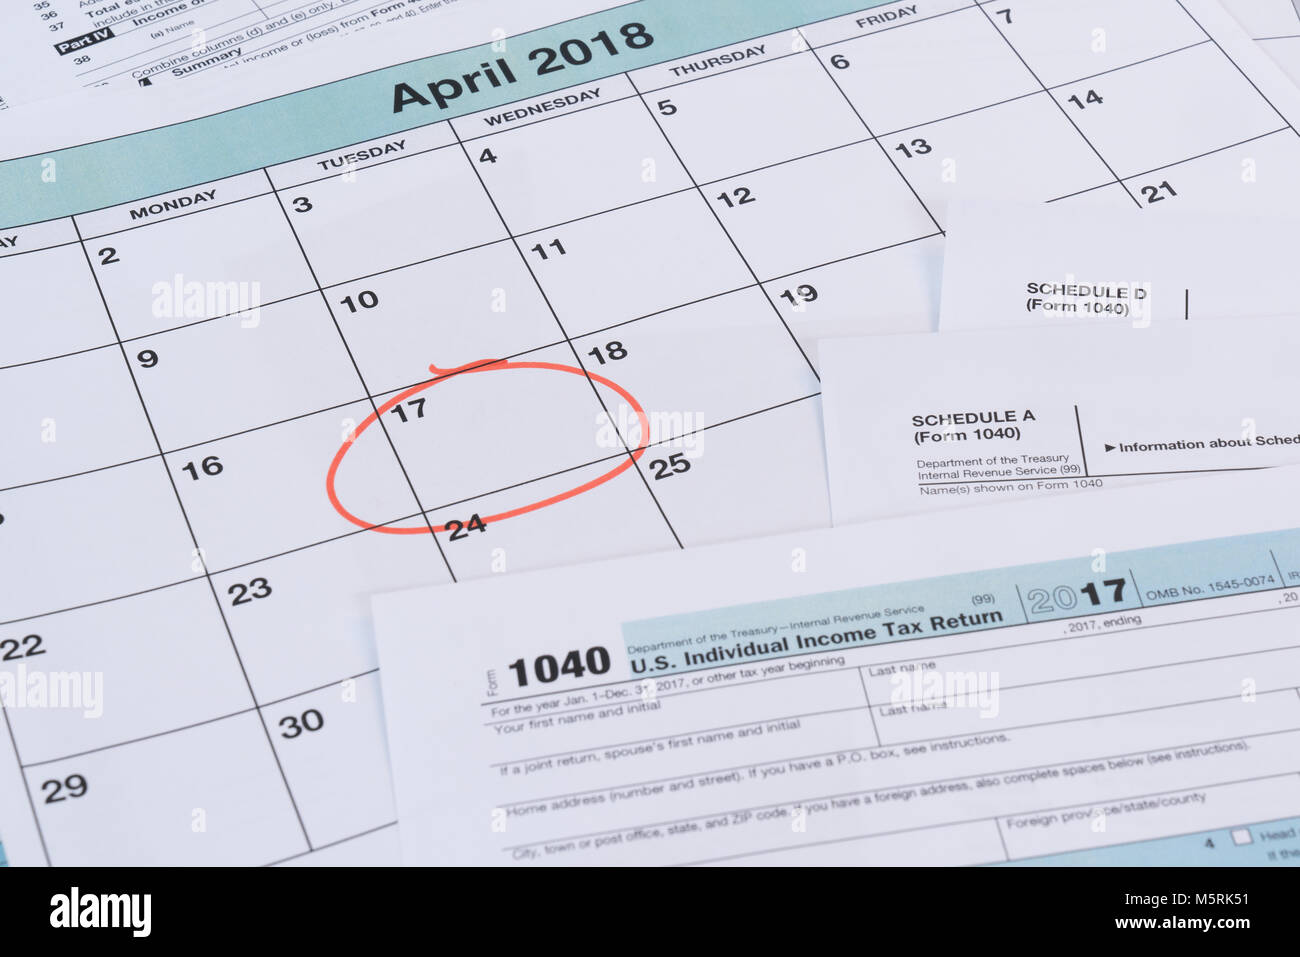 Calendar with reminder for taxes due on April 17th Stock Photo